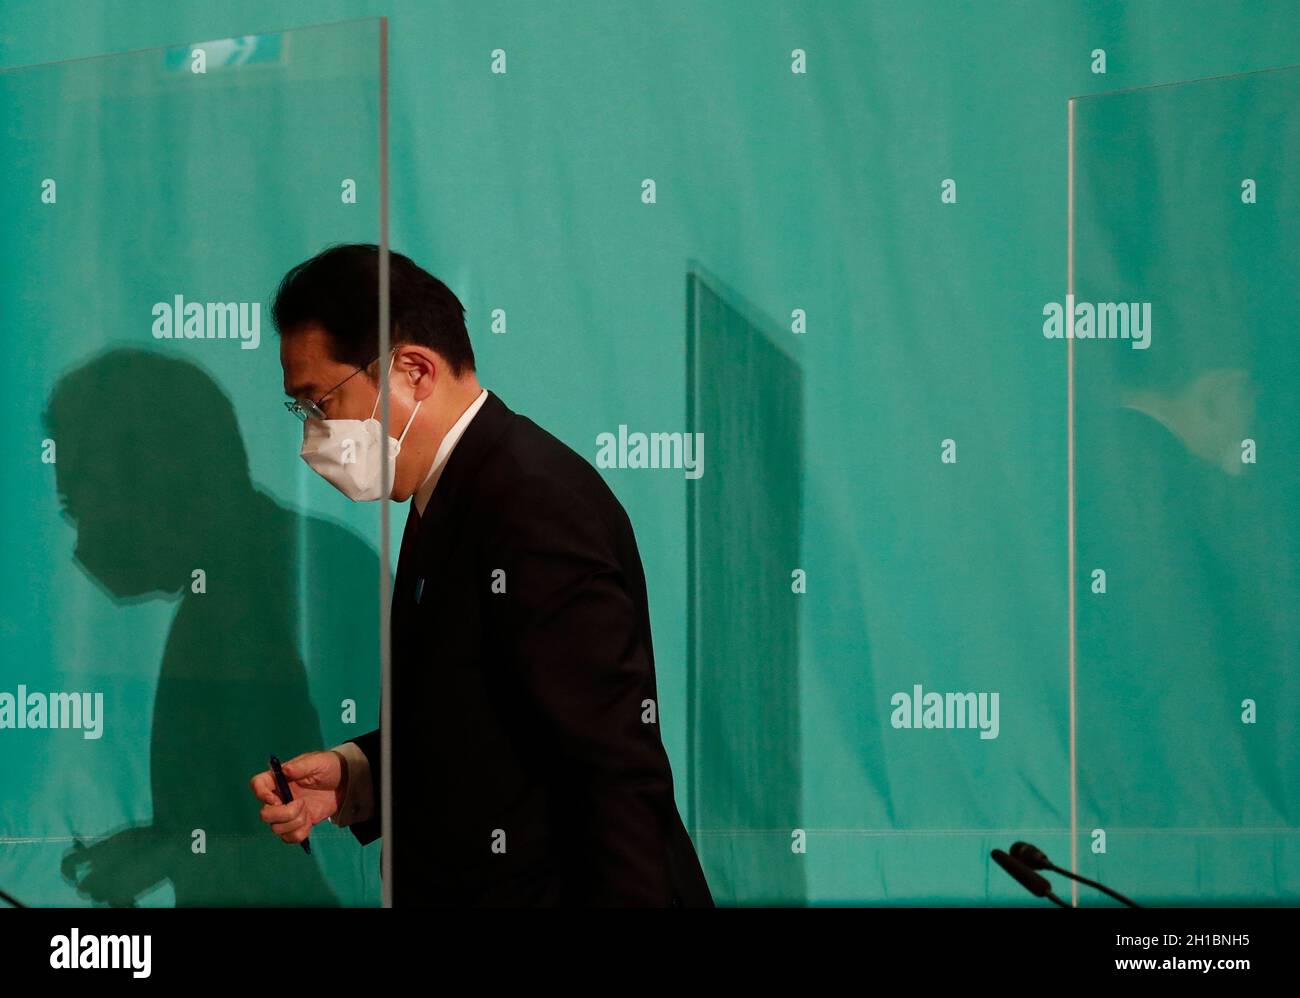 Tokyo, Japan. 18th Oct, 2021. Japan's Prime Minister Fumio Kishida who is also ruling Liberal Democratic Party President, leaves a debate session with other leaders of Japan's main political parties ahead of October 31, 2021 lower house election, at the Japan National Press Club in Tokyo, Japan October 18, 2021. (Photo by Issei Kato/SOPA Images/Sipa USA) Credit: Sipa USA/Alamy Live News Stock Photo